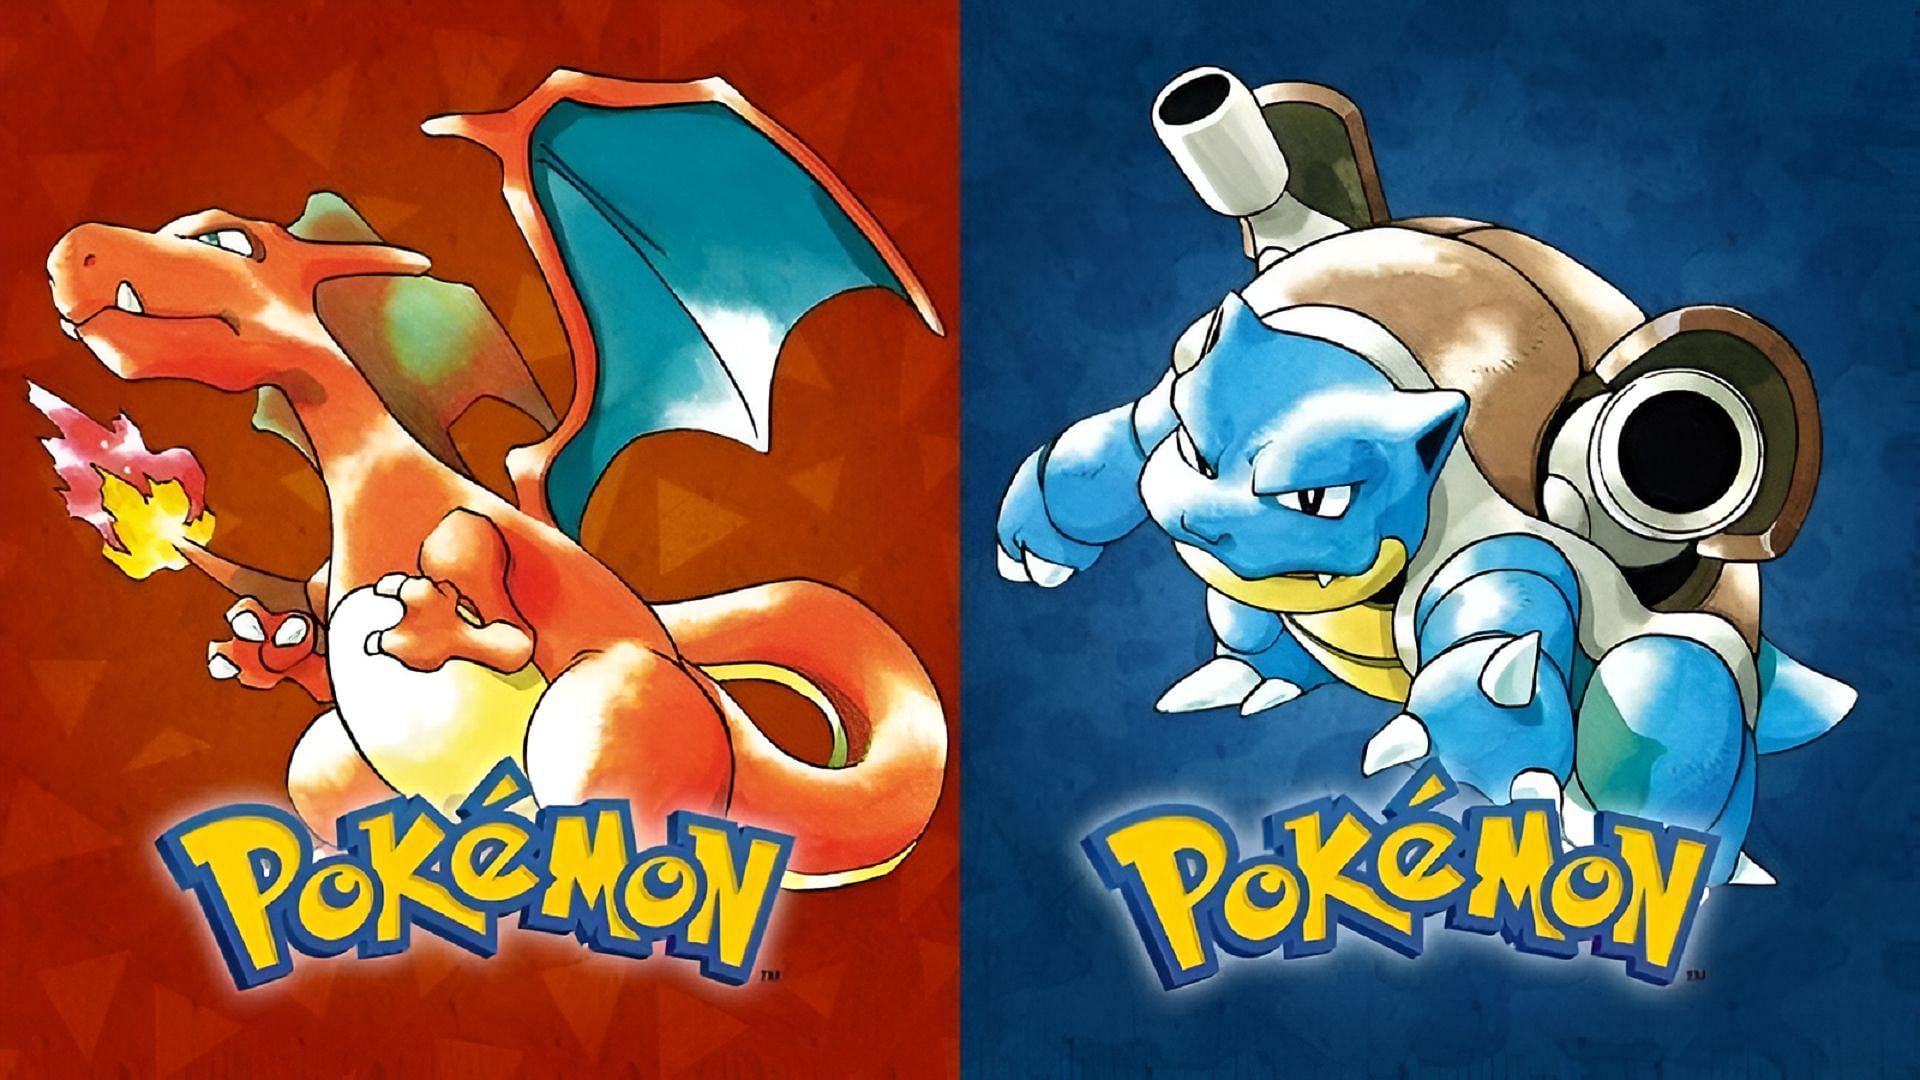 What is the best team composition for Pokemon Red and Blue?